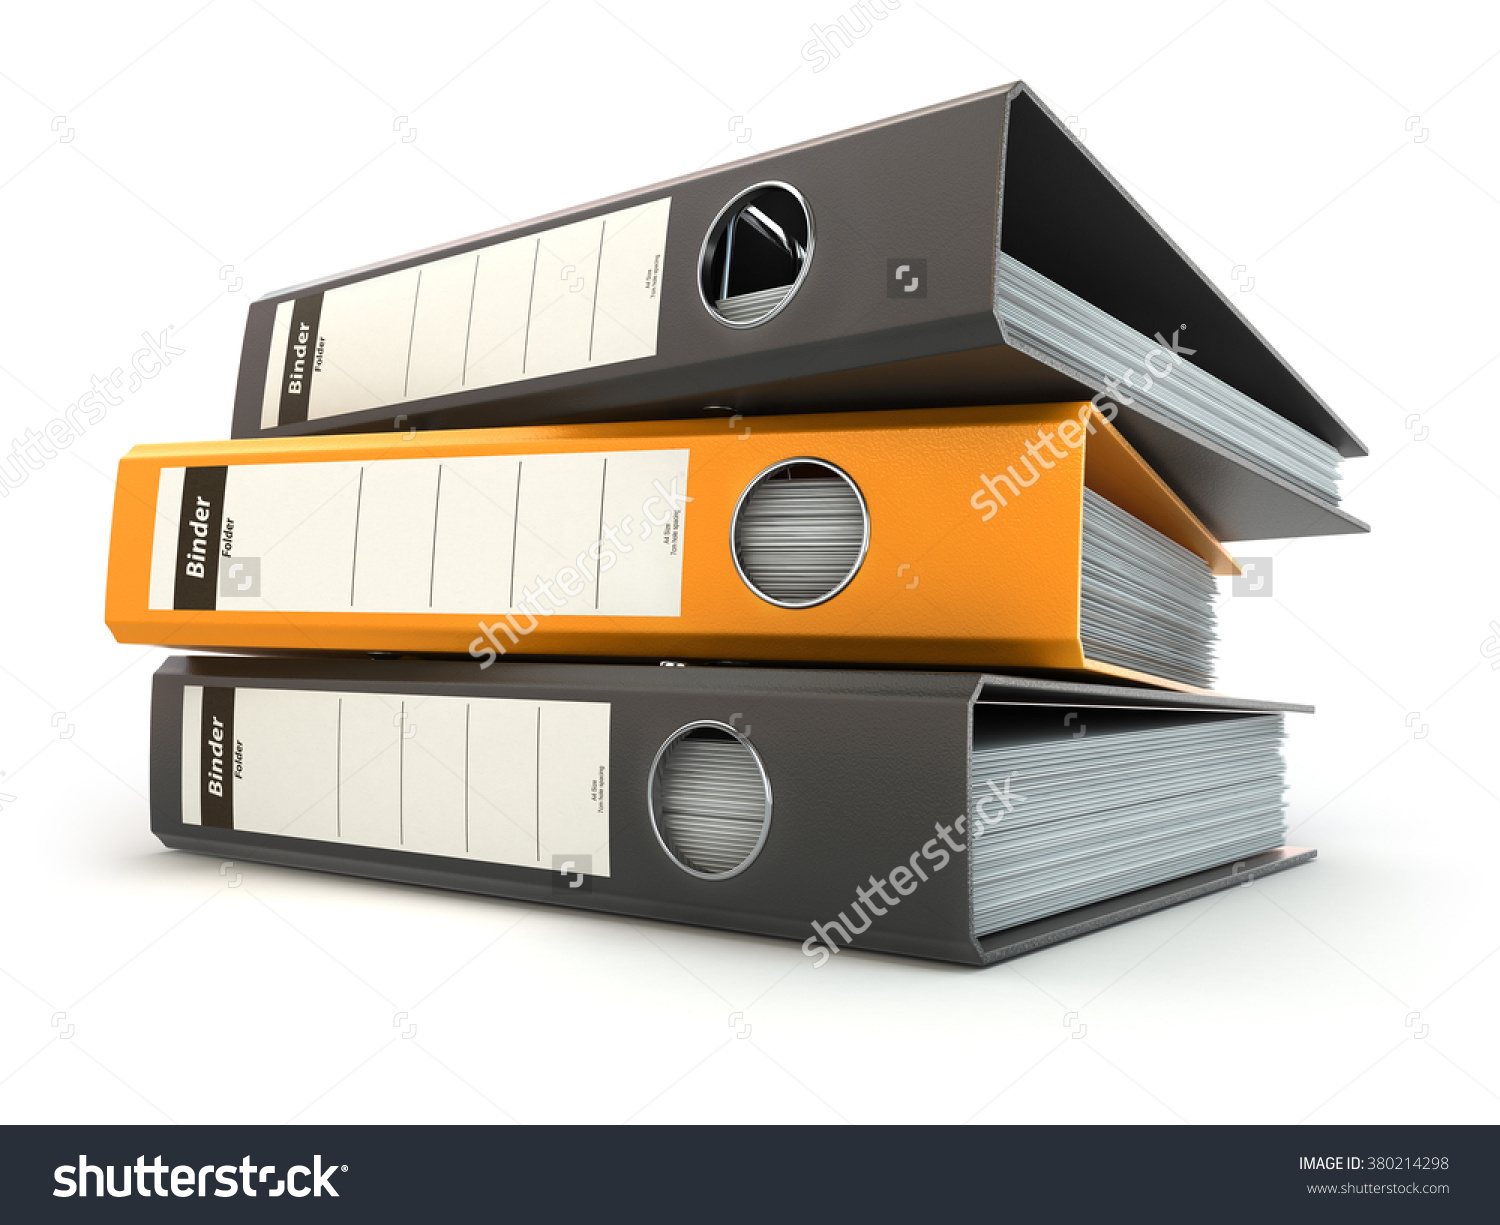 stock-photo-file-folders-or-ring-binders-full-with-office-documents-isolated-on-white-d-380214298